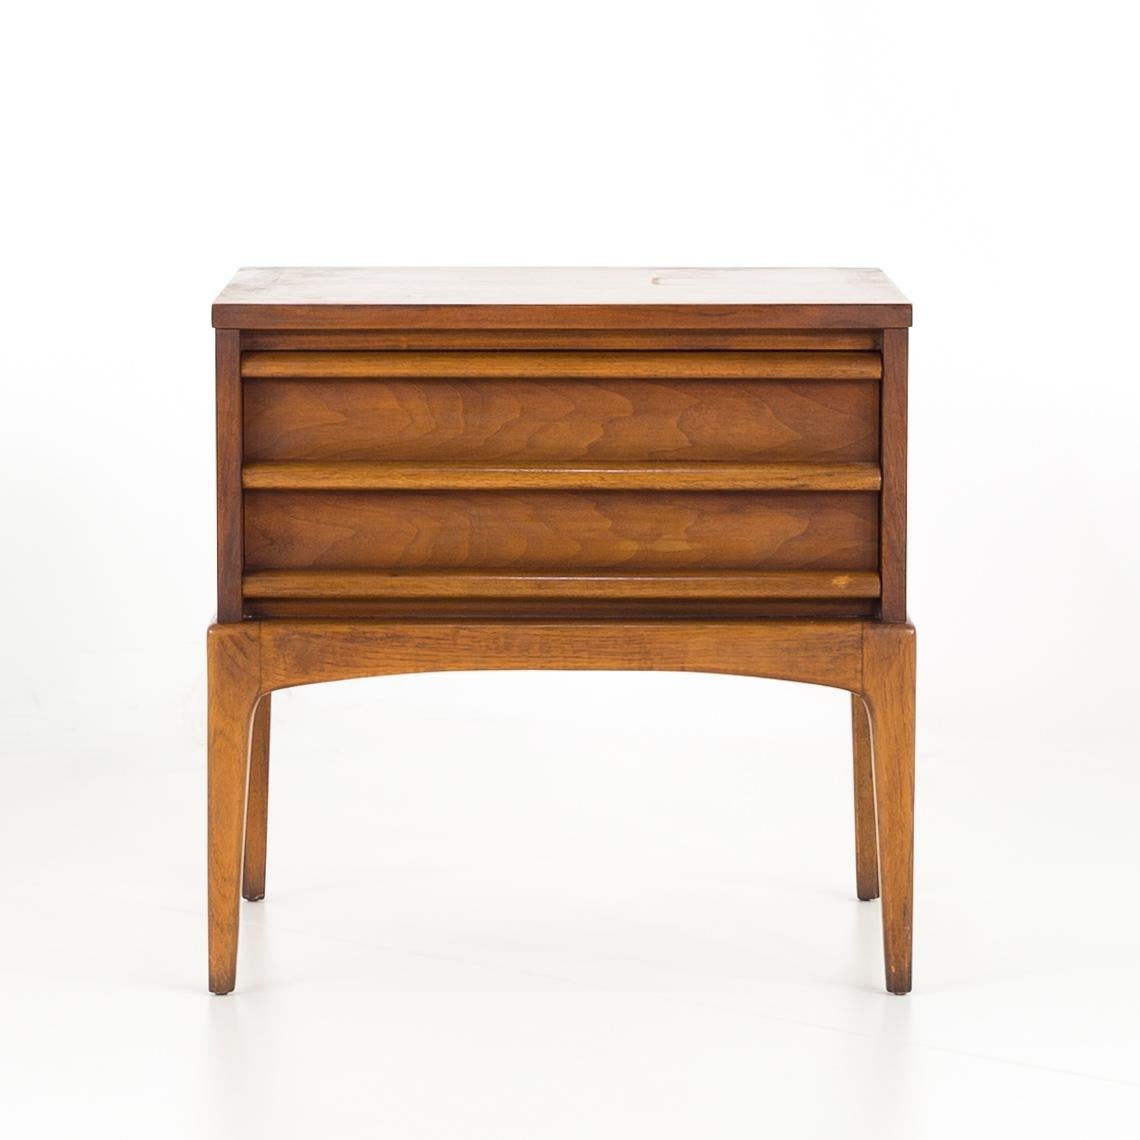 Lane Rhythm Paul McCobb style mid century nightstand

This nightstand measures: 22 wide x 17 deep x 22 high

All pieces of furniture can be had in what we call restored vintage condition. That means the piece is restored upon purchase so it’s free